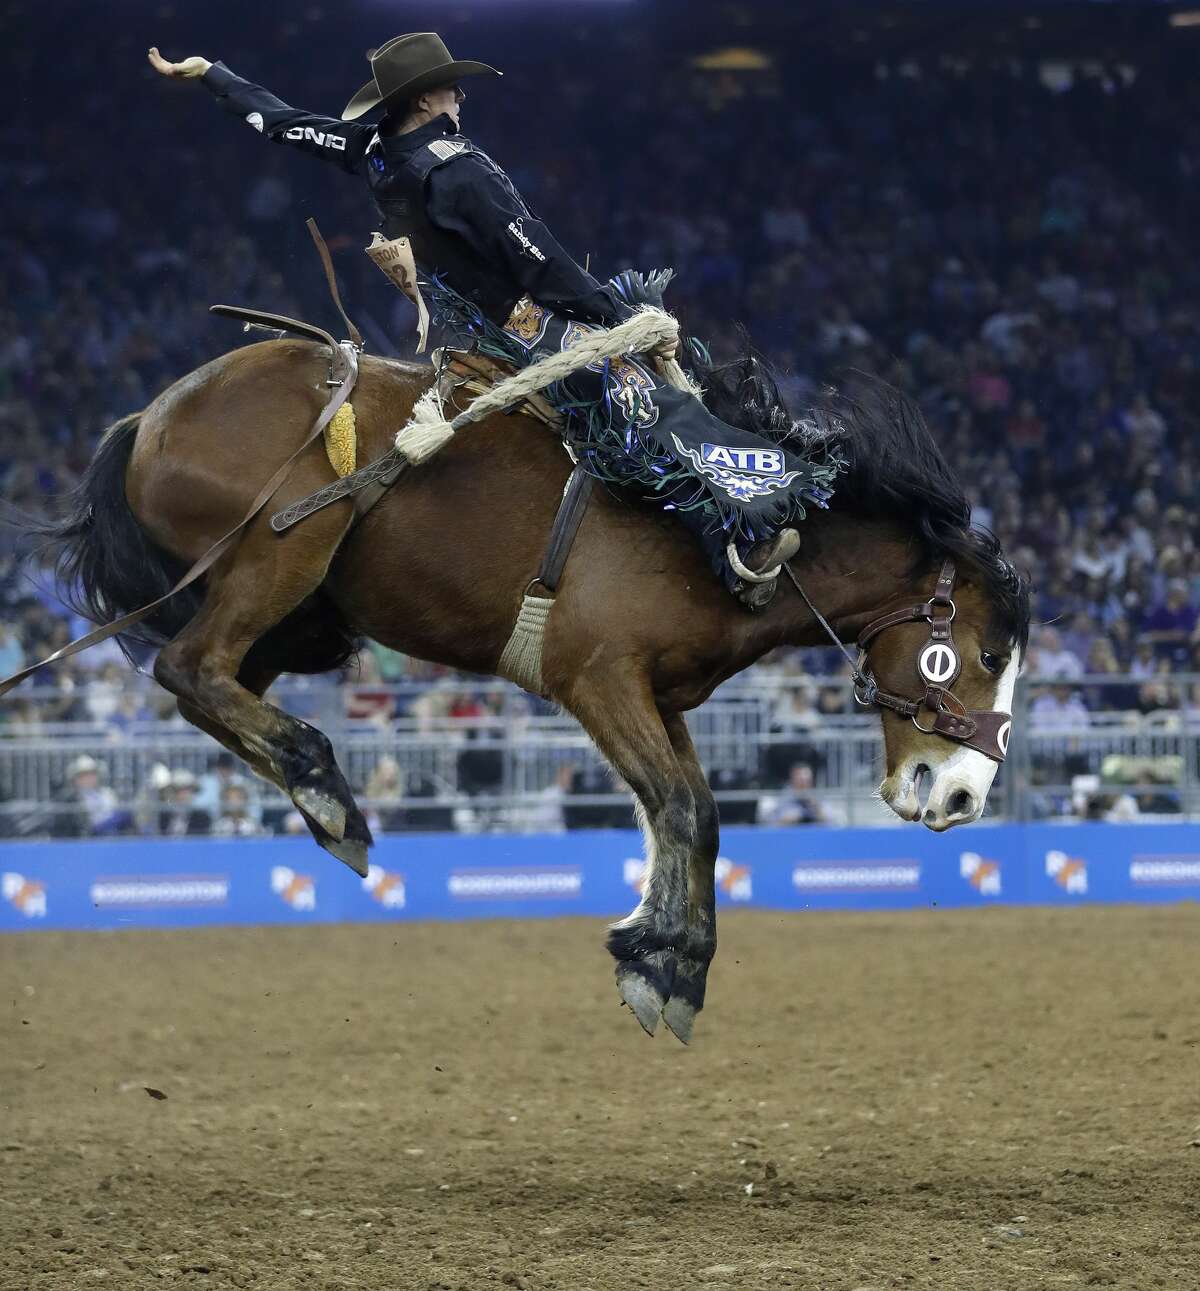 Zeke Thurston rides Banger Main in the Saddle Brionc Riding during the Wild Card competition at the Houston Livestock Show and Rodeo at NRG Stadium, Friday, March 16, 2018, in Houston. ( Karen Warren / Houston Chronicle )